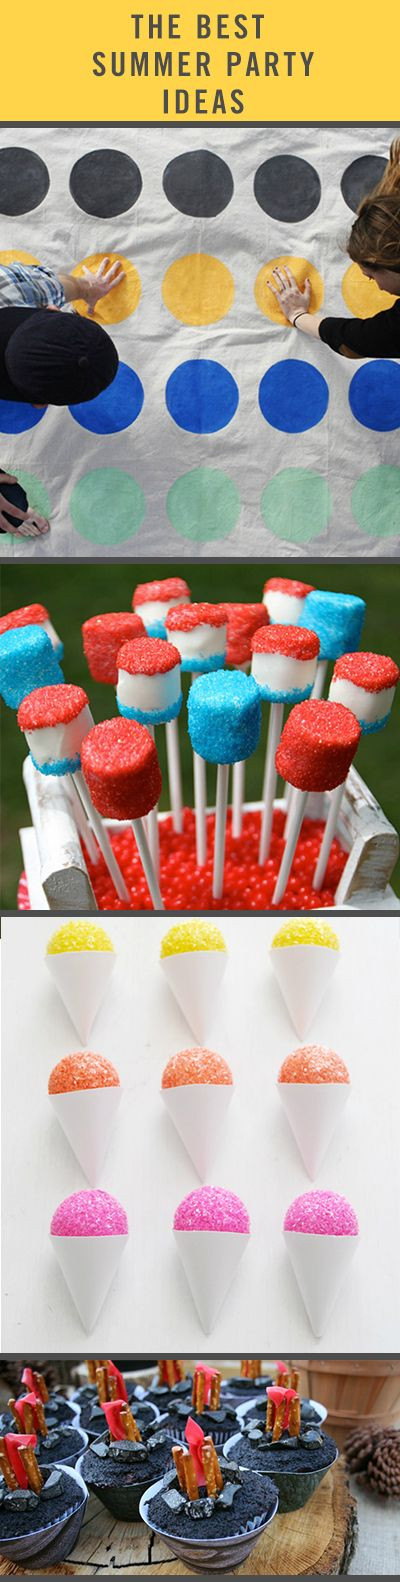 Summer Time Party Ideas
 Summer parties Food ideas and Teenagers on Pinterest